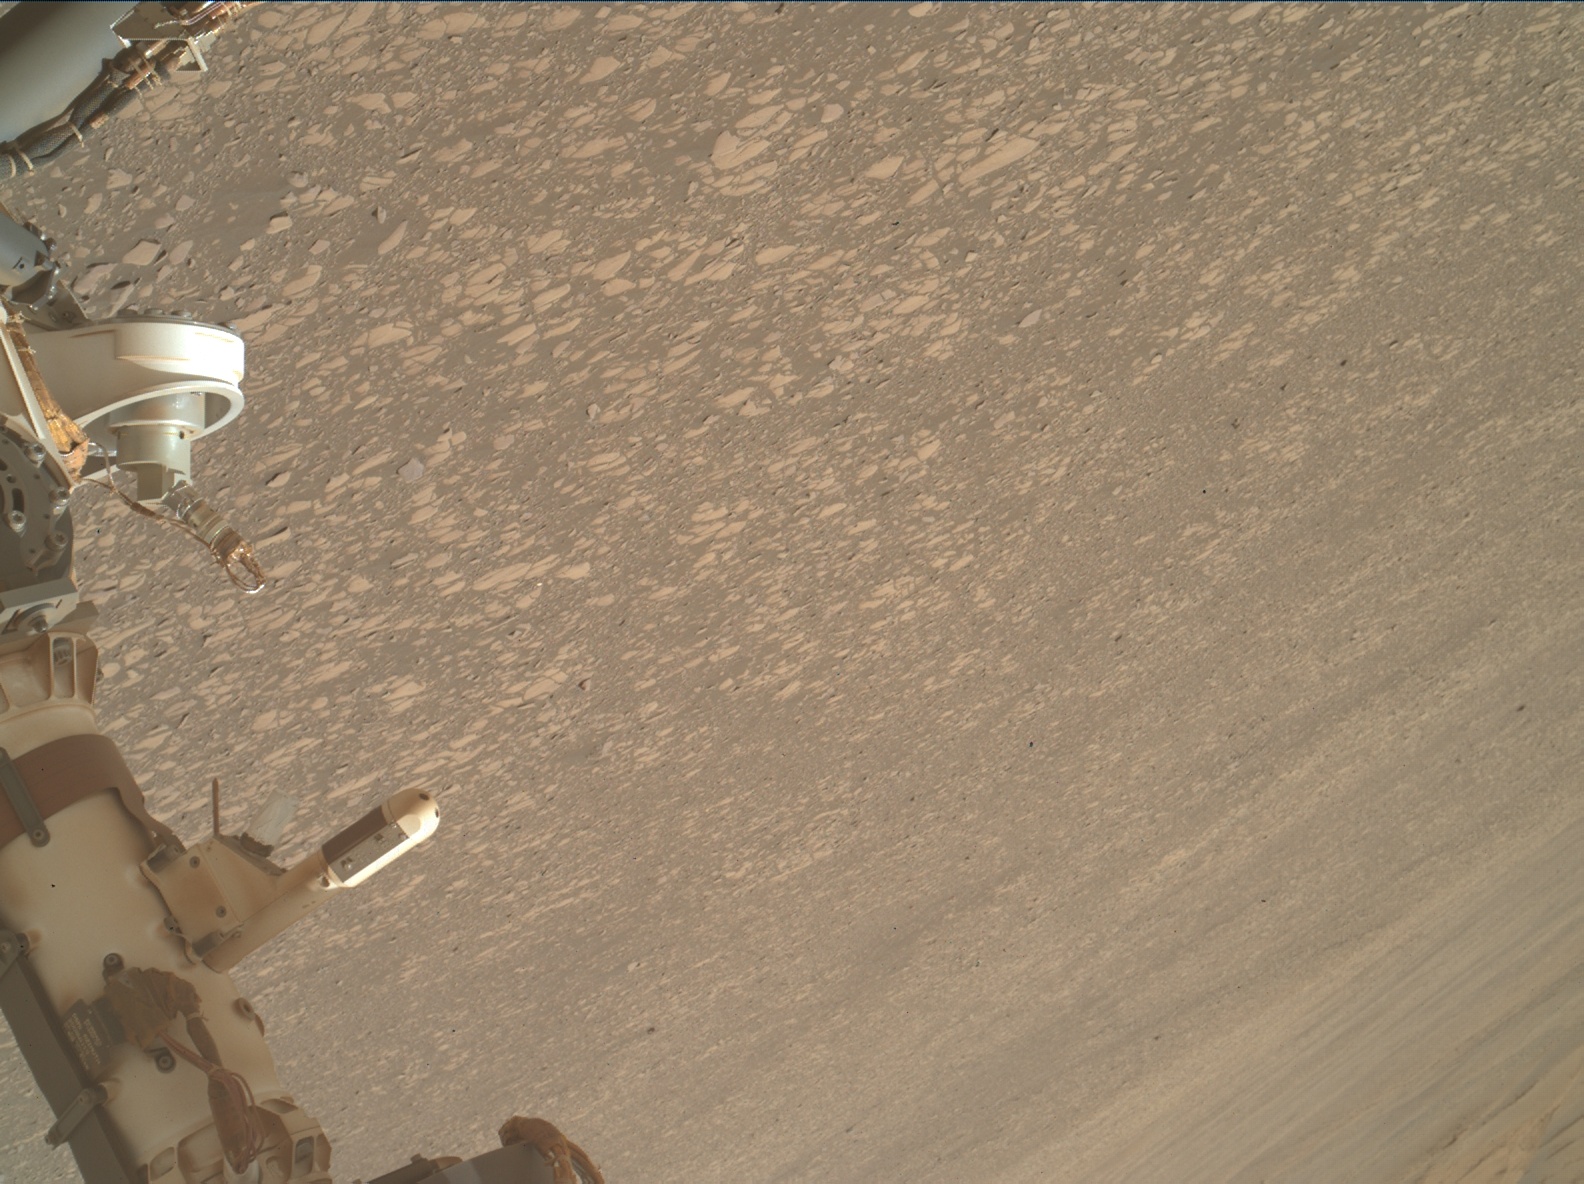 Nasa's Mars rover Curiosity acquired this image using its Mars Hand Lens Imager (MAHLI) on Sol 2405